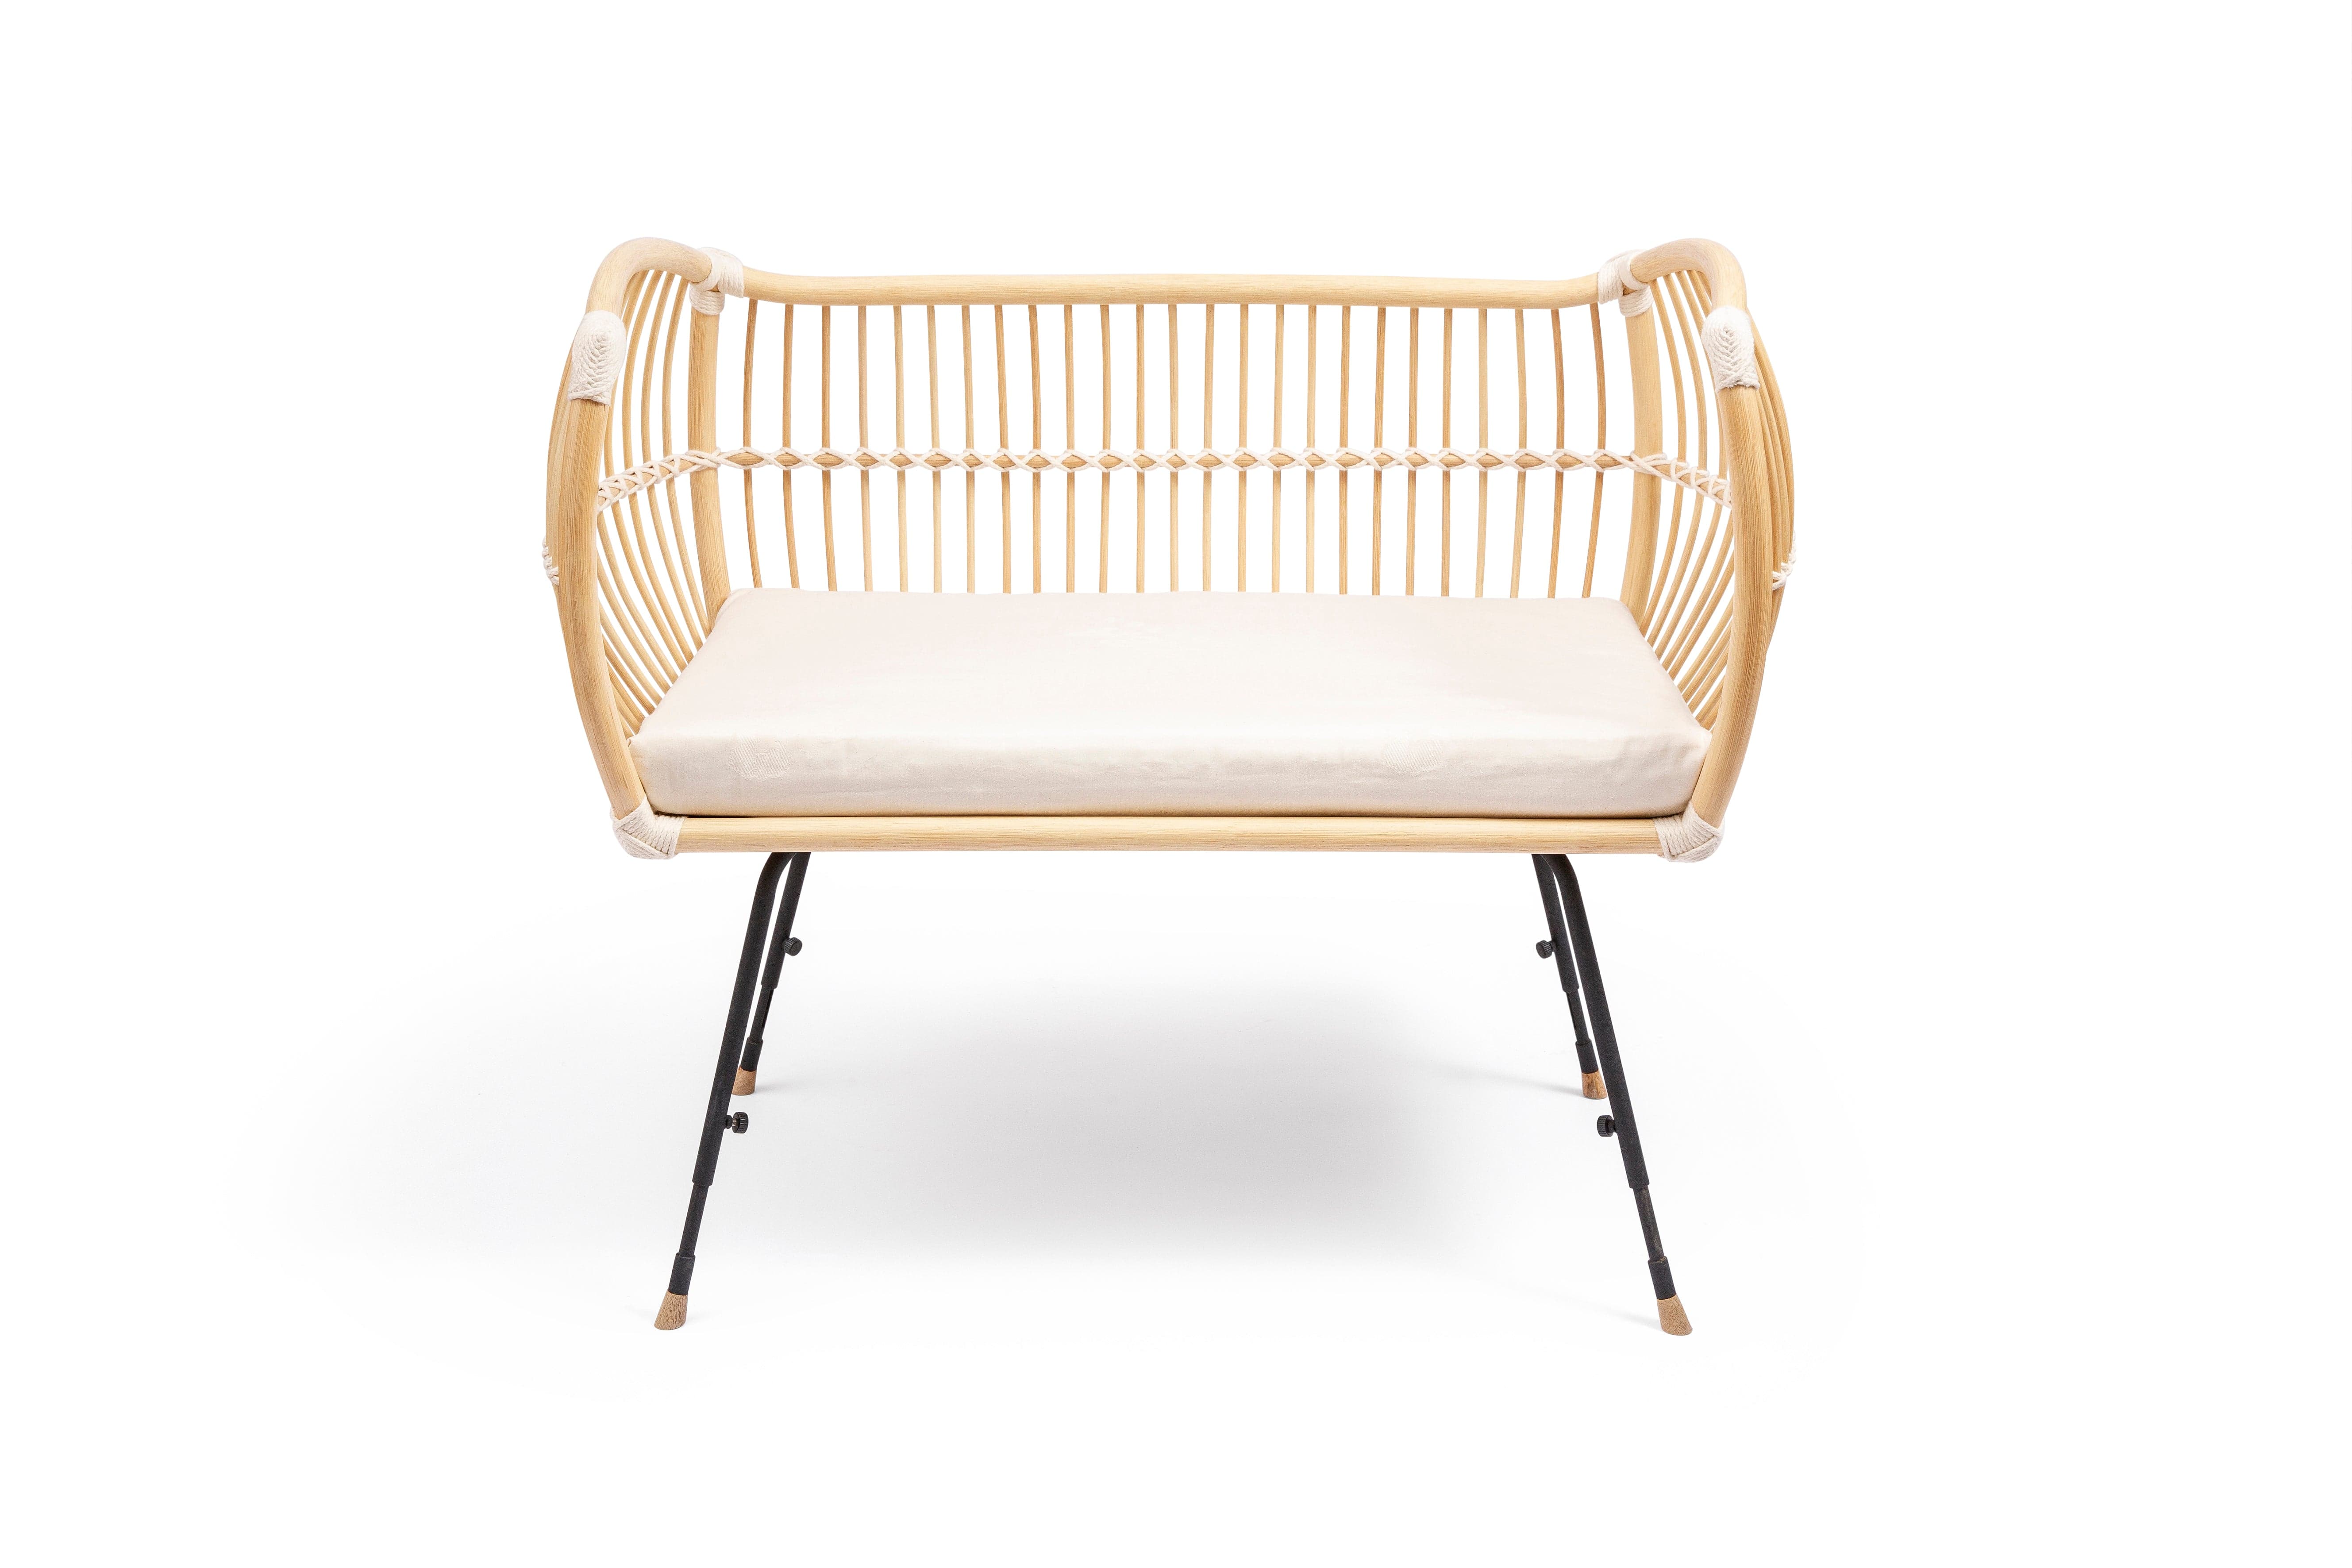 Square bed with outwards curved basket, open on one side. Made of light beige rattan beams, connected with off-white cotton strings and standing on slim black metal legs. 